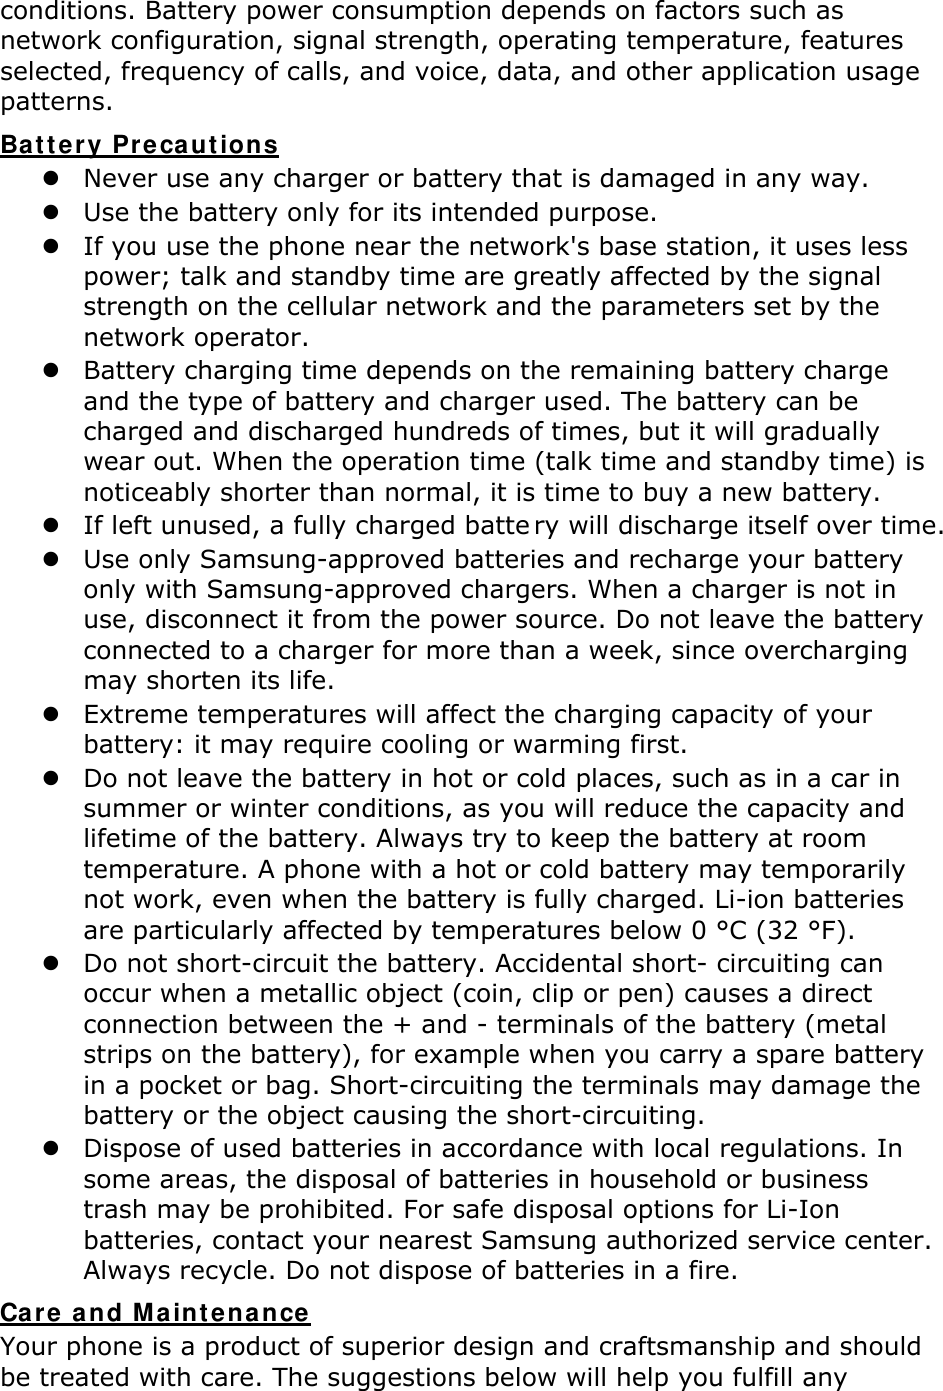 conditions. Battery power consumption depends on factors such as network configuration, signal strength, operating temperature, features selected, frequency of calls, and voice, data, and other application usage patterns.   Battery Precautions  Never use any charger or battery that is damaged in any way.  Use the battery only for its intended purpose.  If you use the phone near the network&apos;s base station, it uses less power; talk and standby time are greatly affected by the signal strength on the cellular network and the parameters set by the network operator.  Battery charging time depends on the remaining battery charge and the type of battery and charger used. The battery can be charged and discharged hundreds of times, but it will gradually wear out. When the operation time (talk time and standby time) is noticeably shorter than normal, it is time to buy a new battery.  If left unused, a fully charged batte ry will discharge itself over time.   Use only Samsung-approved batteries and recharge your battery only with Samsung-approved chargers. When a charger is not in use, disconnect it from the power source. Do not leave the battery connected to a charger for more than a week, since overcharging may shorten its life.  Extreme temperatures will affect the charging capacity of your battery: it may require cooling or warming first.  Do not leave the battery in hot or cold places, such as in a car in summer or winter conditions, as you will reduce the capacity and lifetime of the battery. Always try to keep the battery at room temperature. A phone with a hot or cold battery may temporarily not work, even when the battery is fully charged. Li-ion batteries are particularly affected by temperatures below 0 °C (32 °F).  Do not short-circuit the battery. Accidental short- circuiting can occur when a metallic object (coin, clip or pen) causes a direct connection between the + and - terminals of the battery (metal strips on the battery), for example when you carry a spare battery in a pocket or bag. Short-circuiting the terminals may damage the battery or the object causing the short-circuiting.  Dispose of used batteries in accordance with local regulations. In some areas, the disposal of batteries in household or business trash may be prohibited. For safe disposal options for Li-Ion batteries, contact your nearest Samsung authorized service center. Always recycle. Do not dispose of batteries in a fire. Care and Maintenance Your phone is a product of superior design and craftsmanship and should be treated with care. The suggestions below will help you fulfill any 